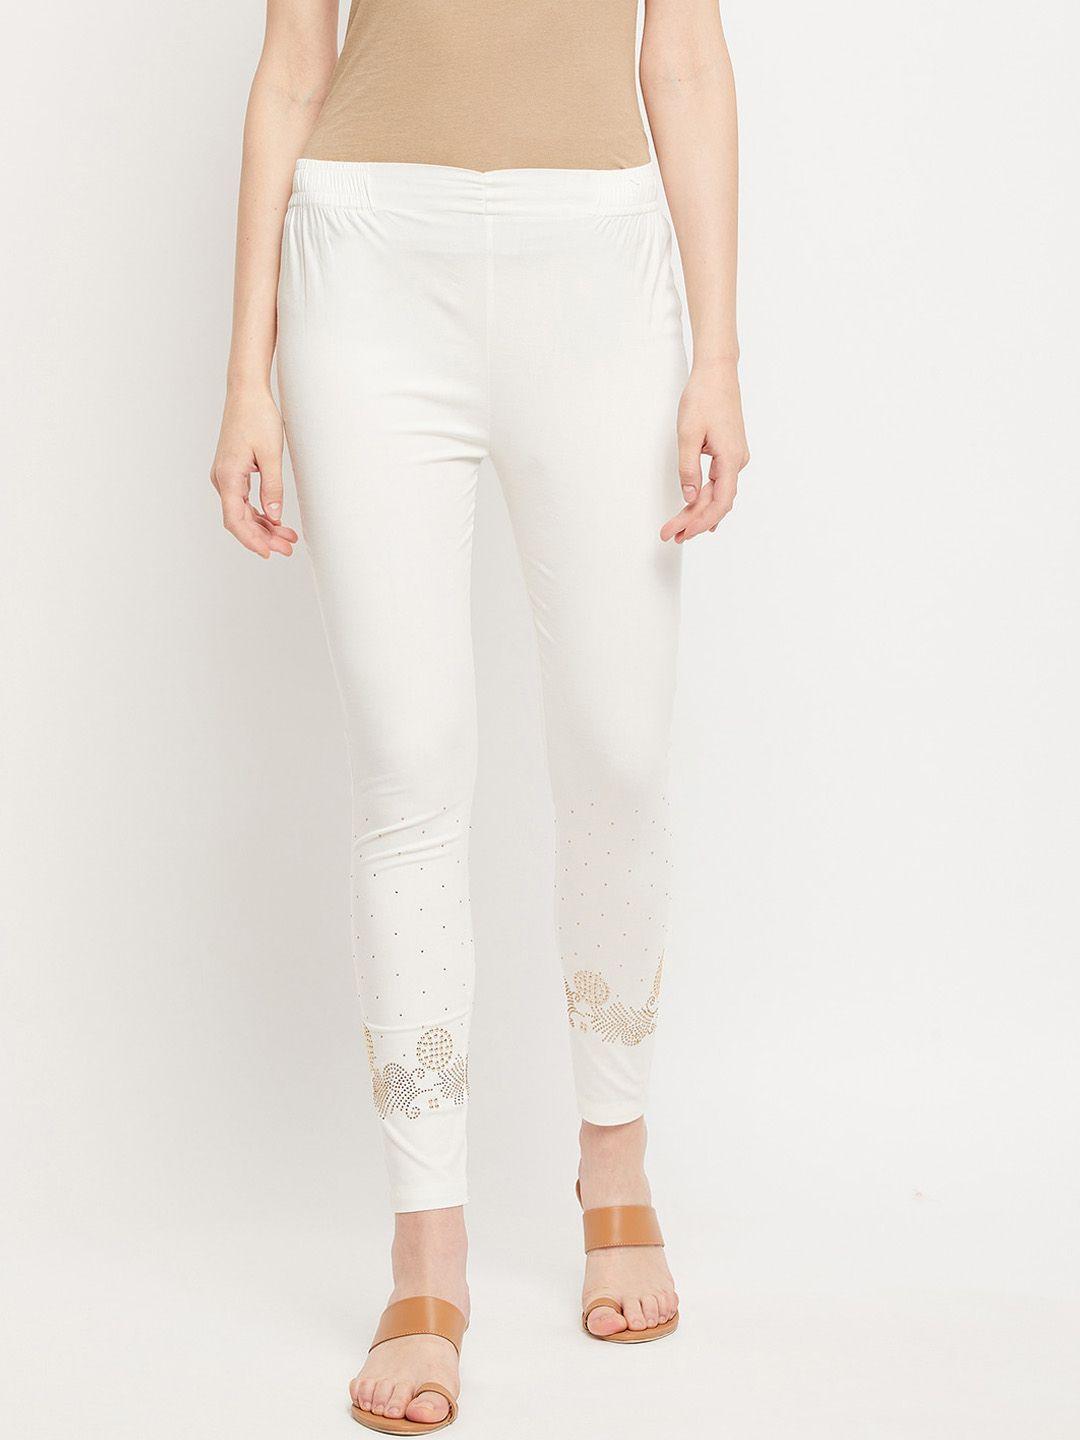 clora-creation-women-embellished-cigarette-trousers